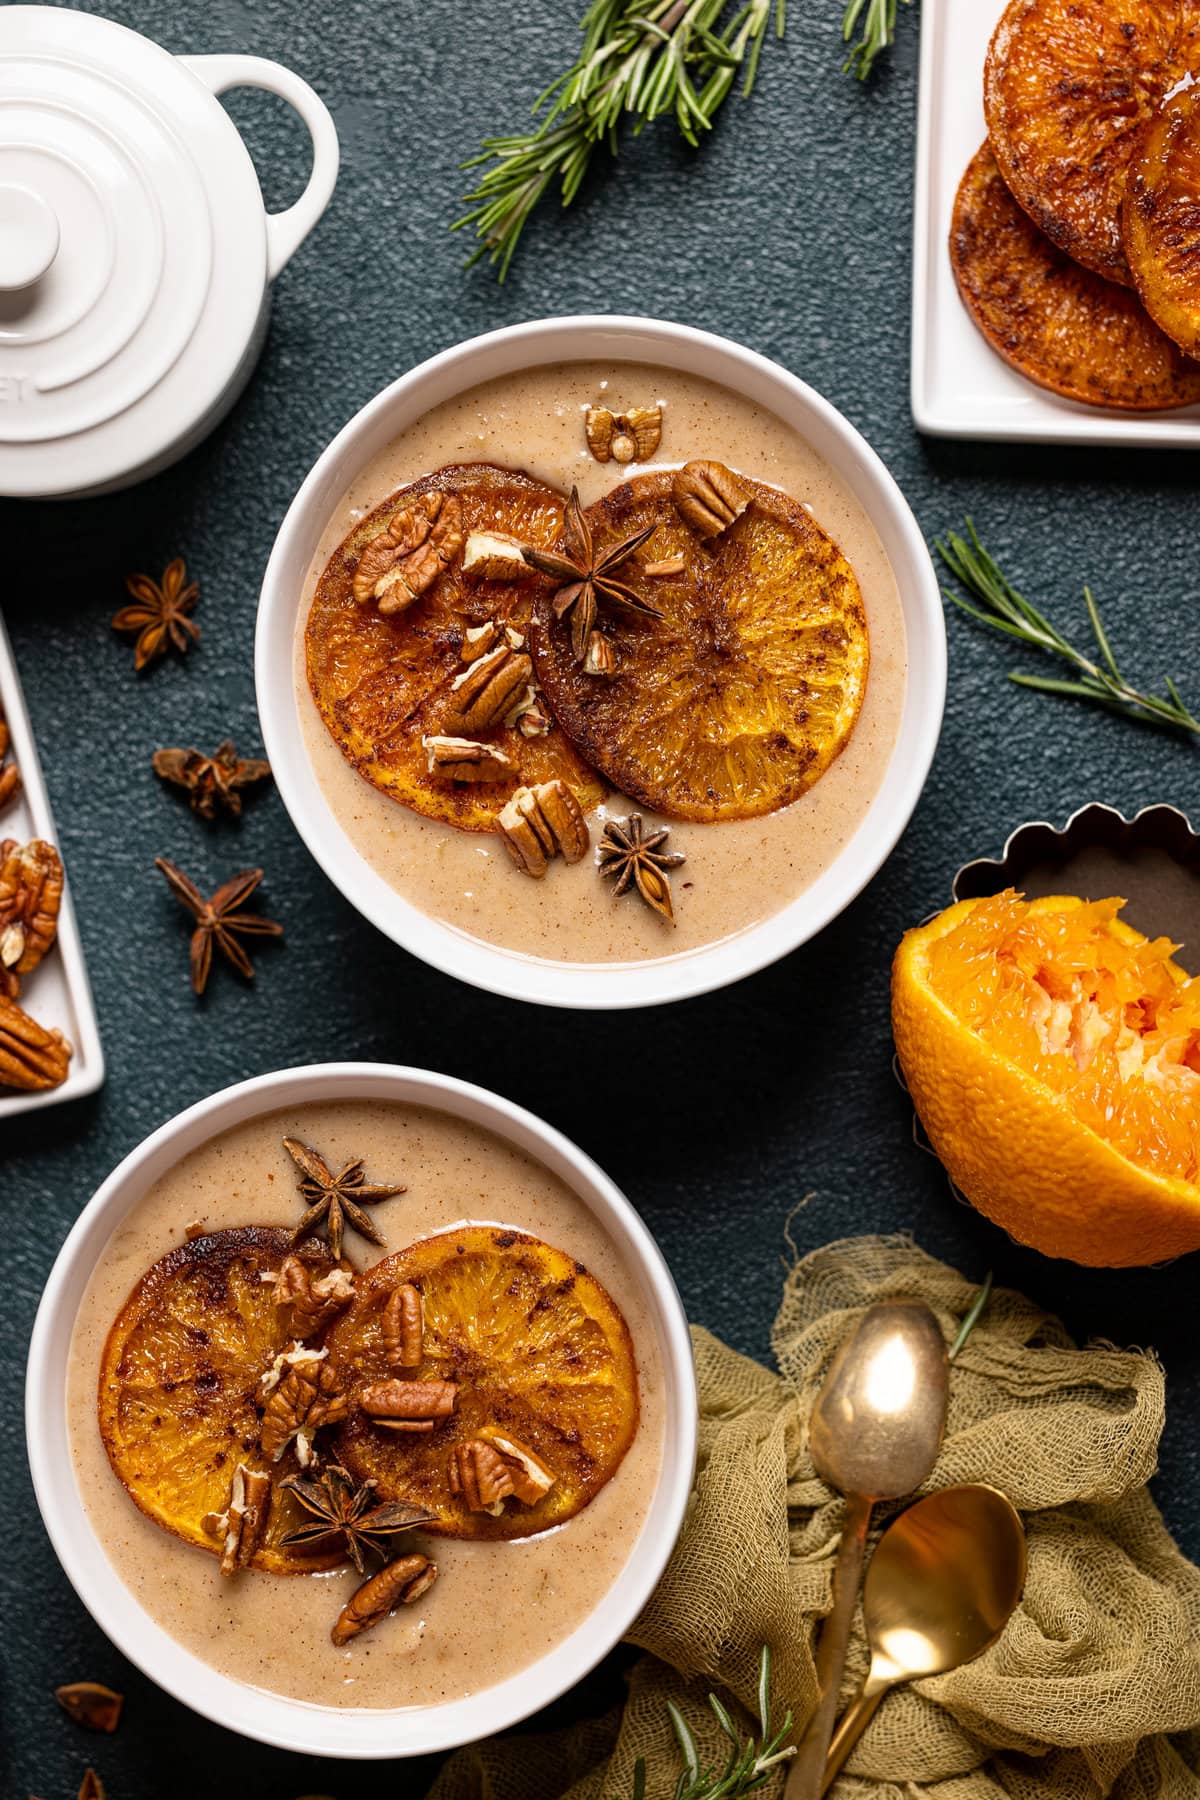 Two bowls of Maple Cinnamon Oatmeal with Roasted Oranges